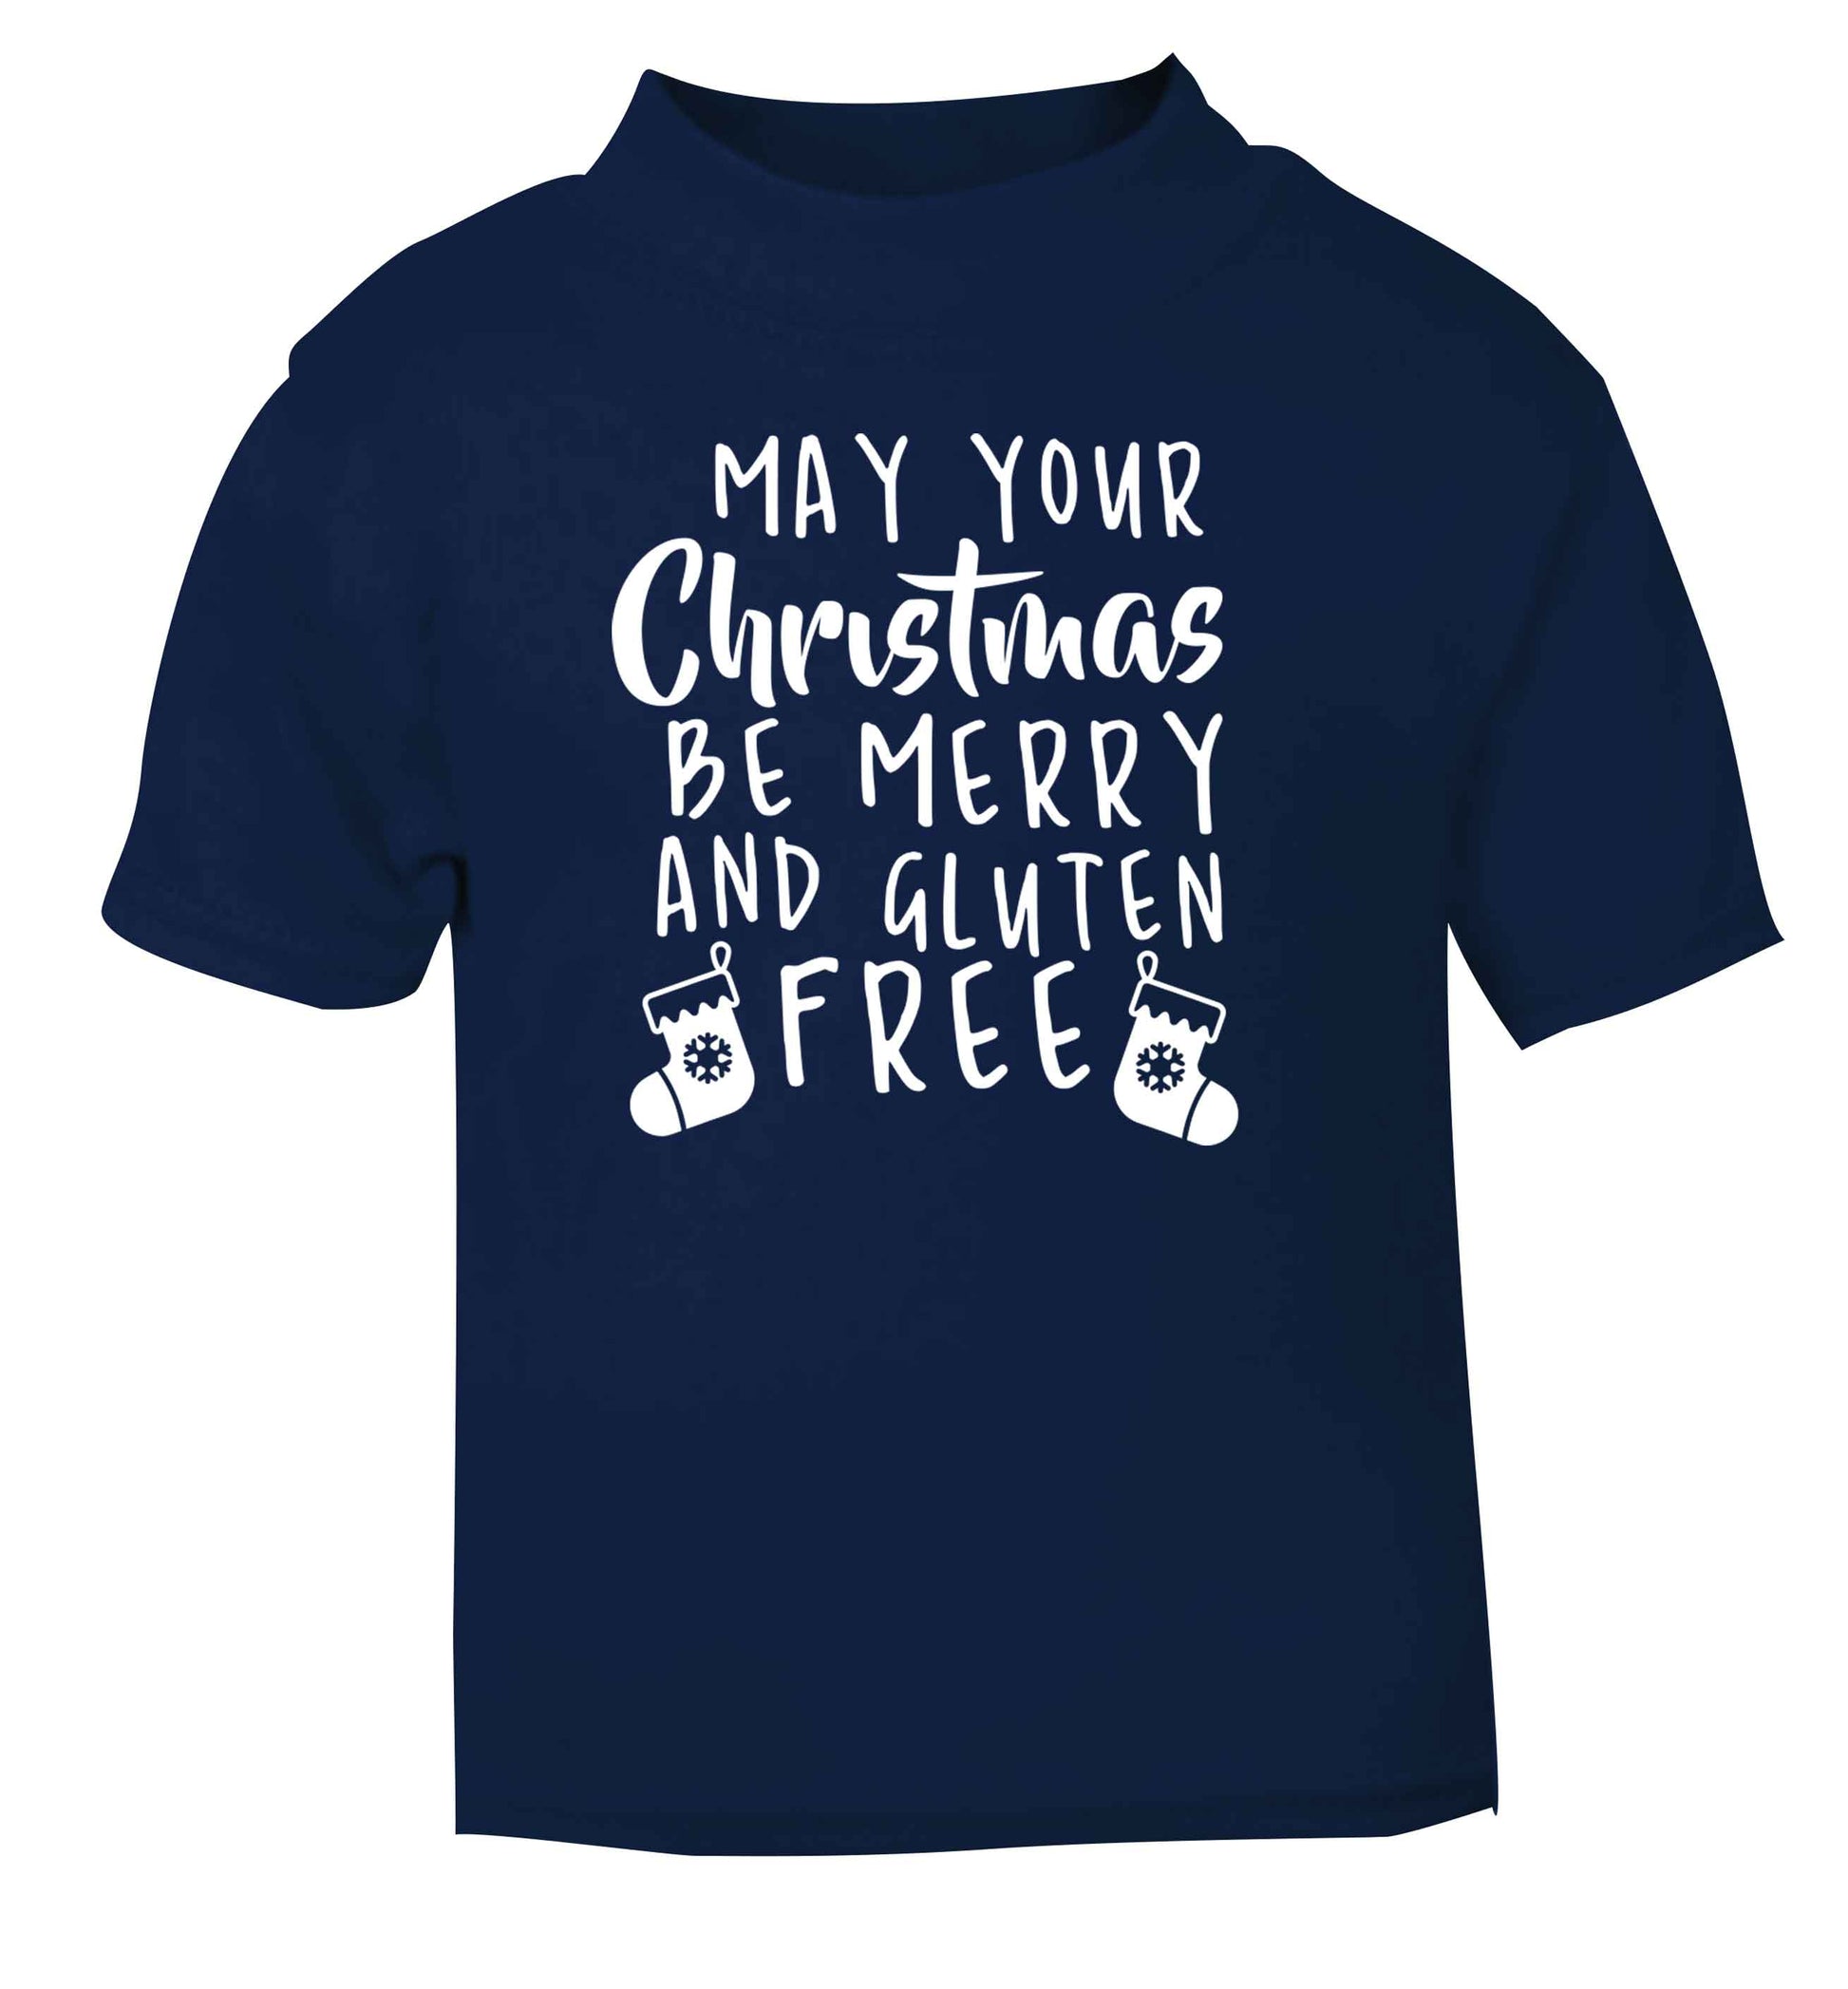 May your Christmas be merry and gluten free navy Baby Toddler Tshirt 2 Years